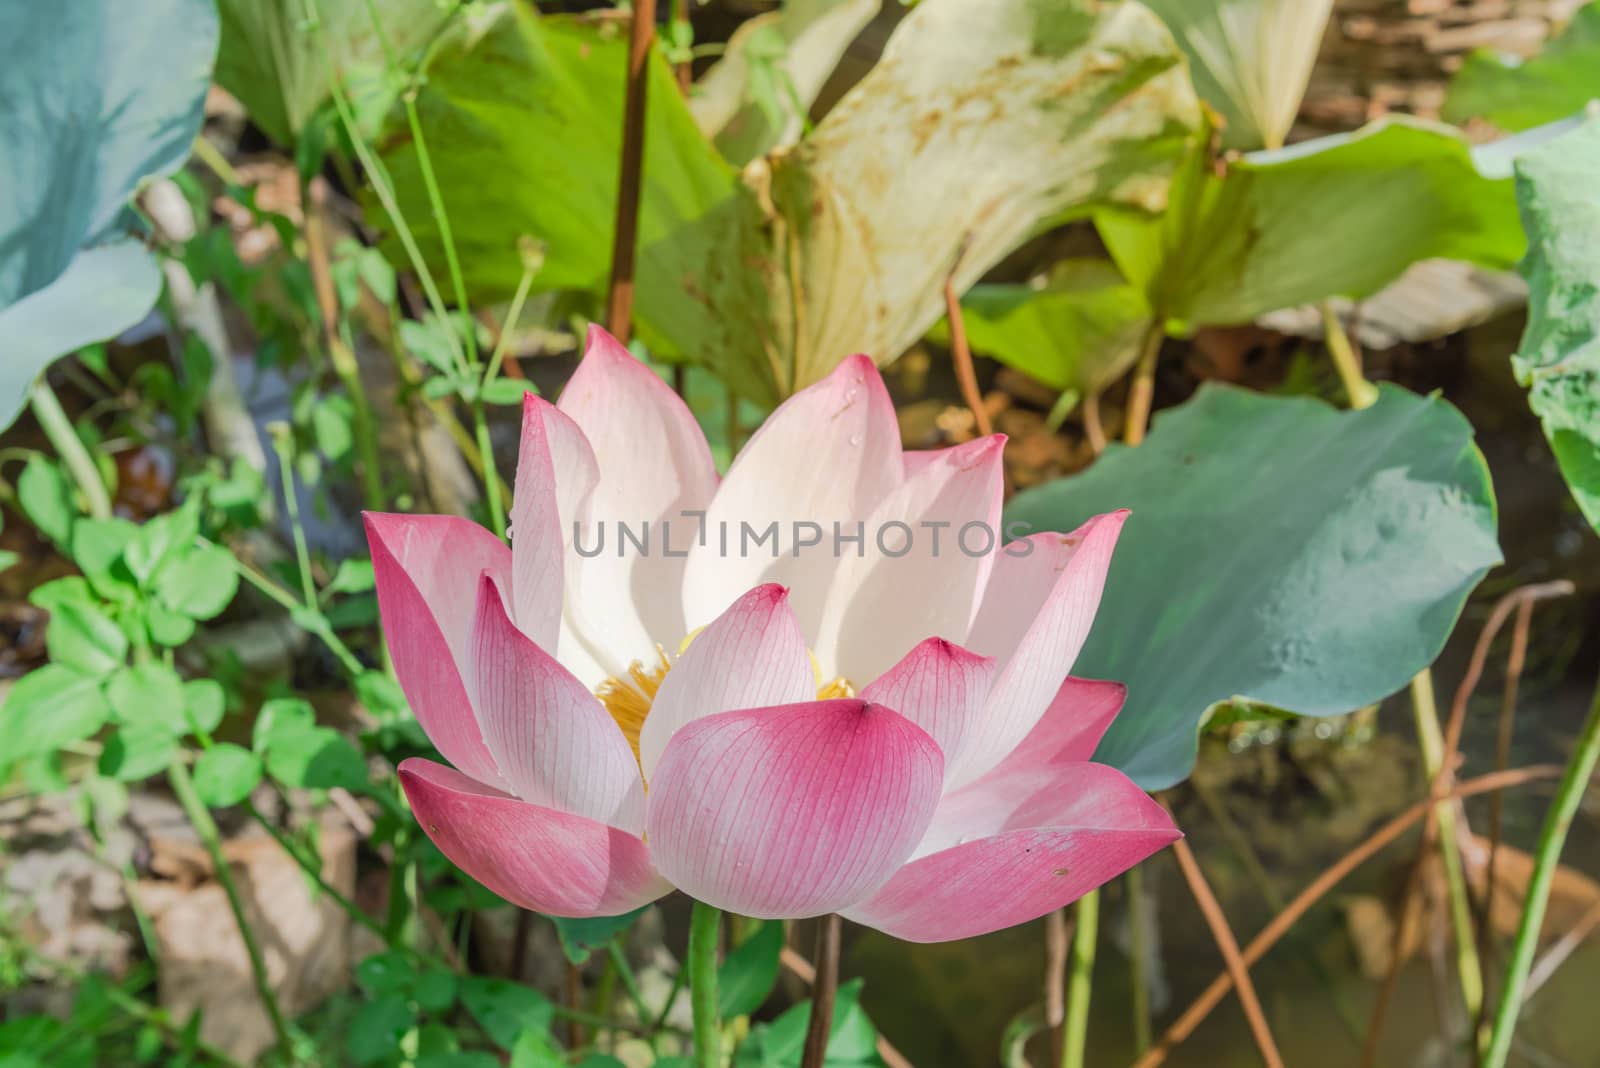 Blossom pink lotus flower and water drop at summertime in Vietnam. White and pink floral with golden stamen and large green leaf background.